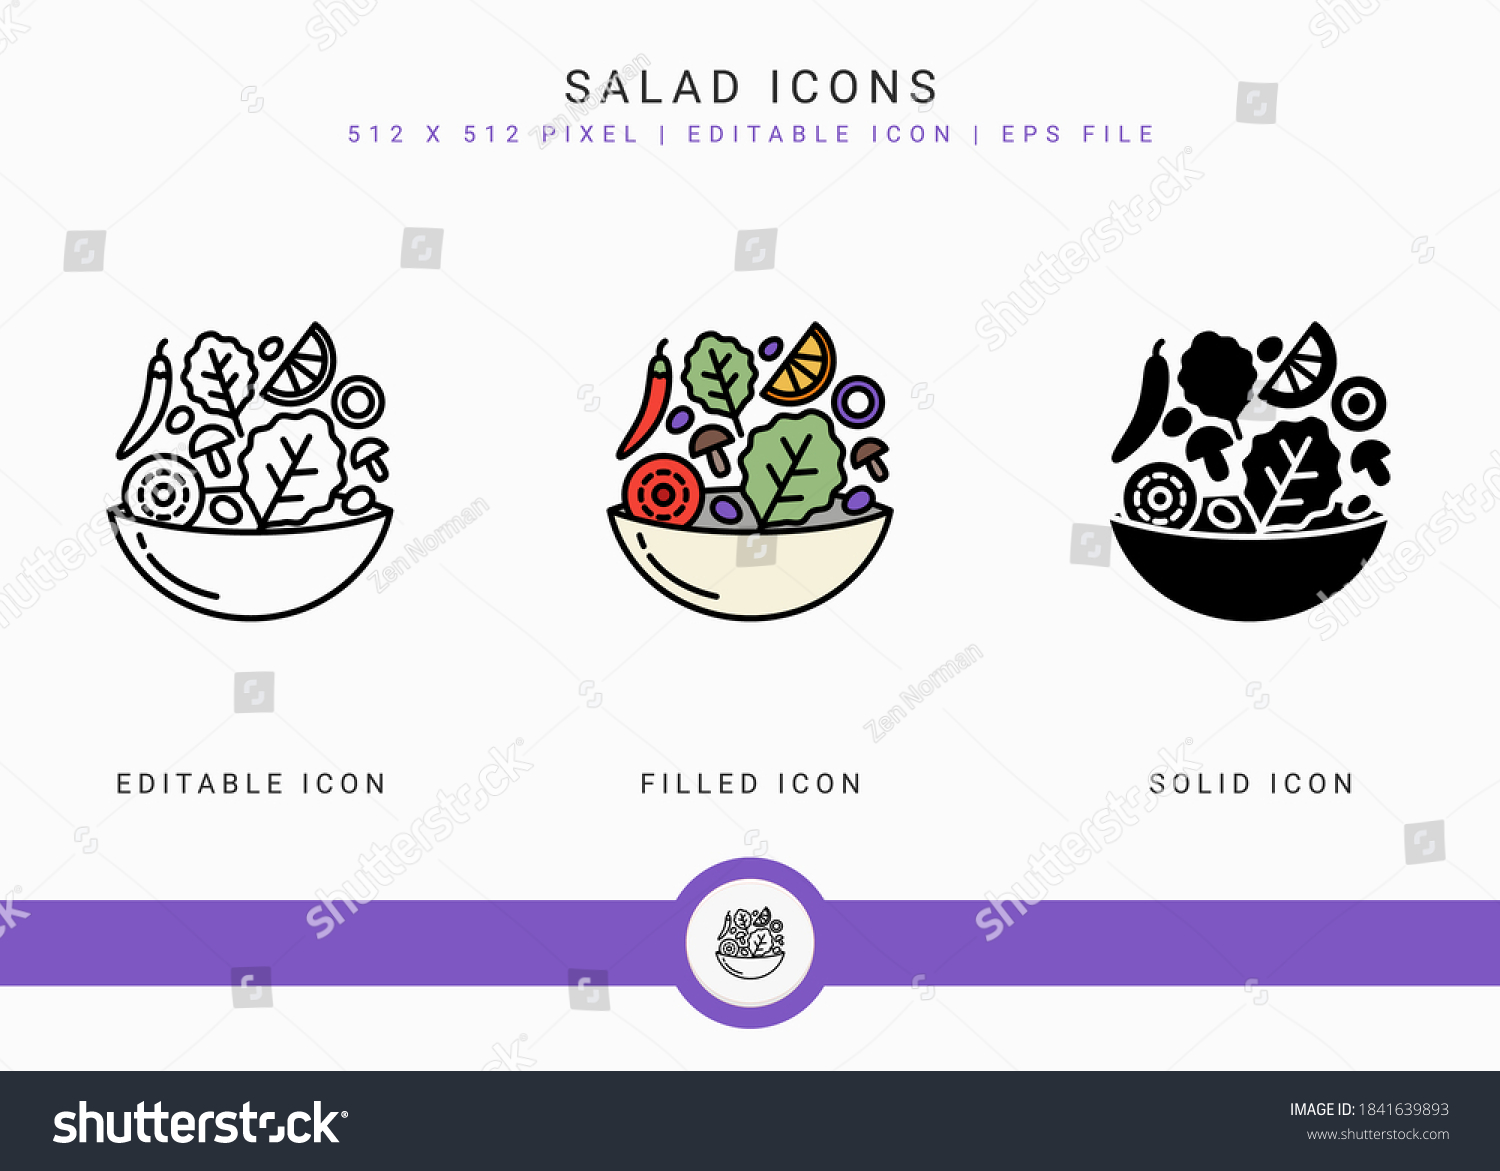 Salad icons set vector illustration with solid icon line style. Healthy diet food concept. Editable stroke icon on isolated white background for web design, user interface, and mobile application #1841639893